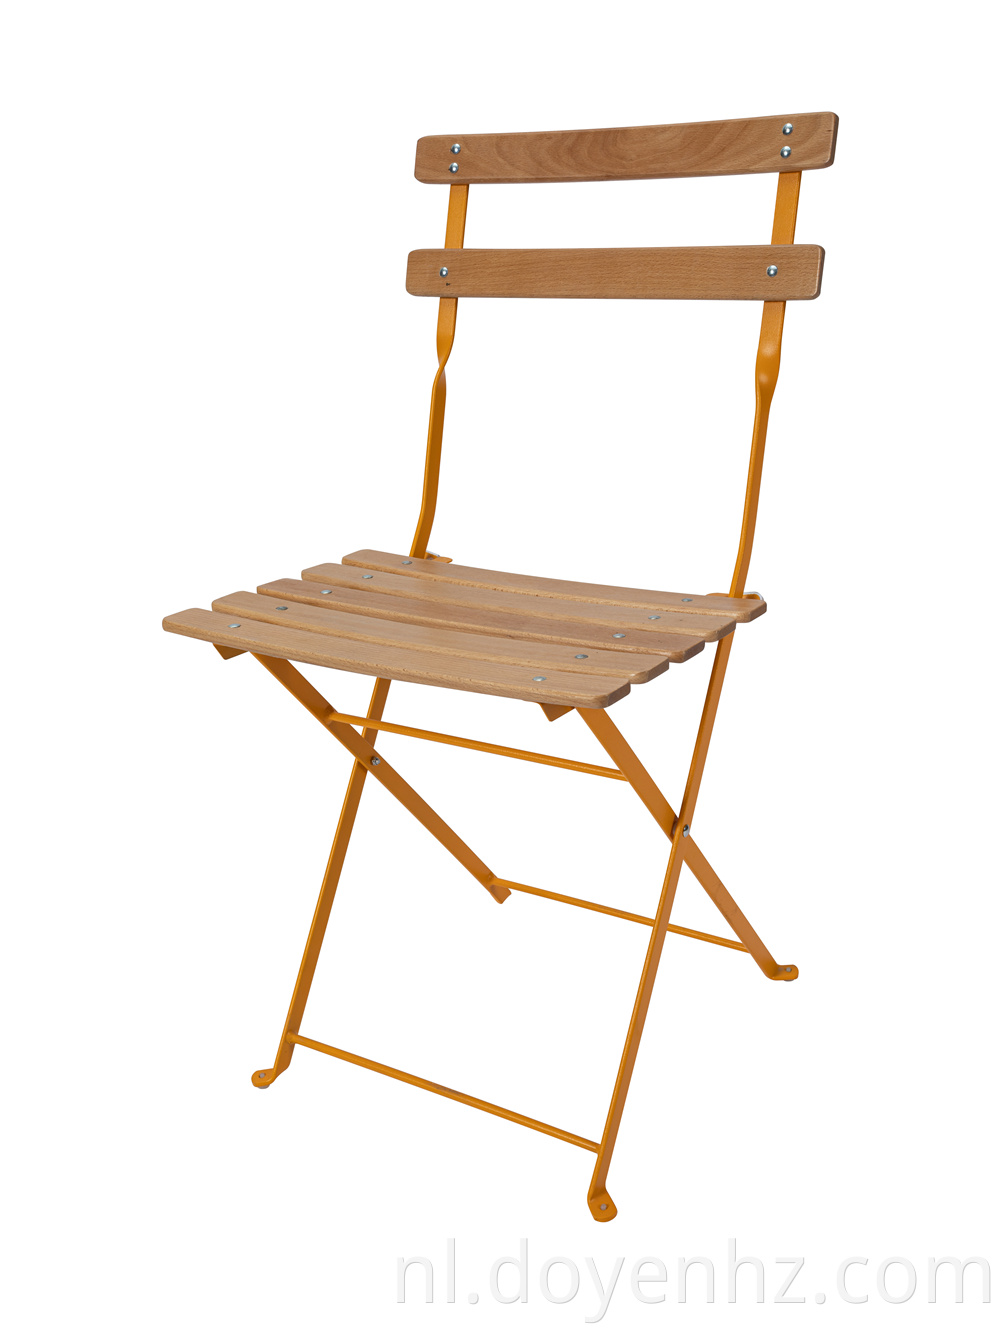 Wooden Top Steel Frame Foldable Chairs